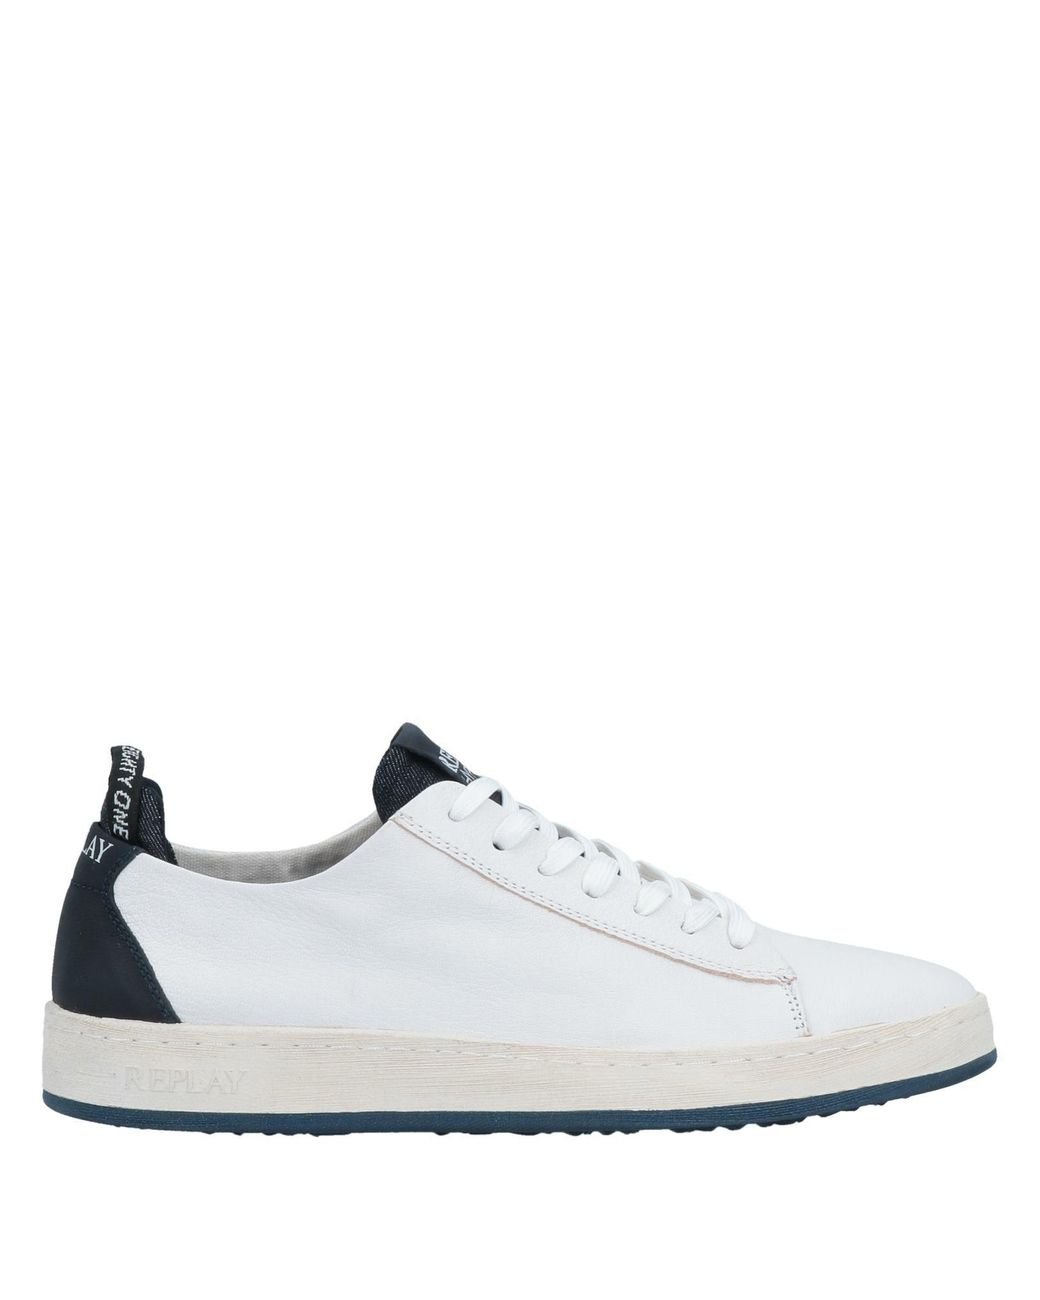 Replay Low-tops & Sneakers in White for Men - Lyst